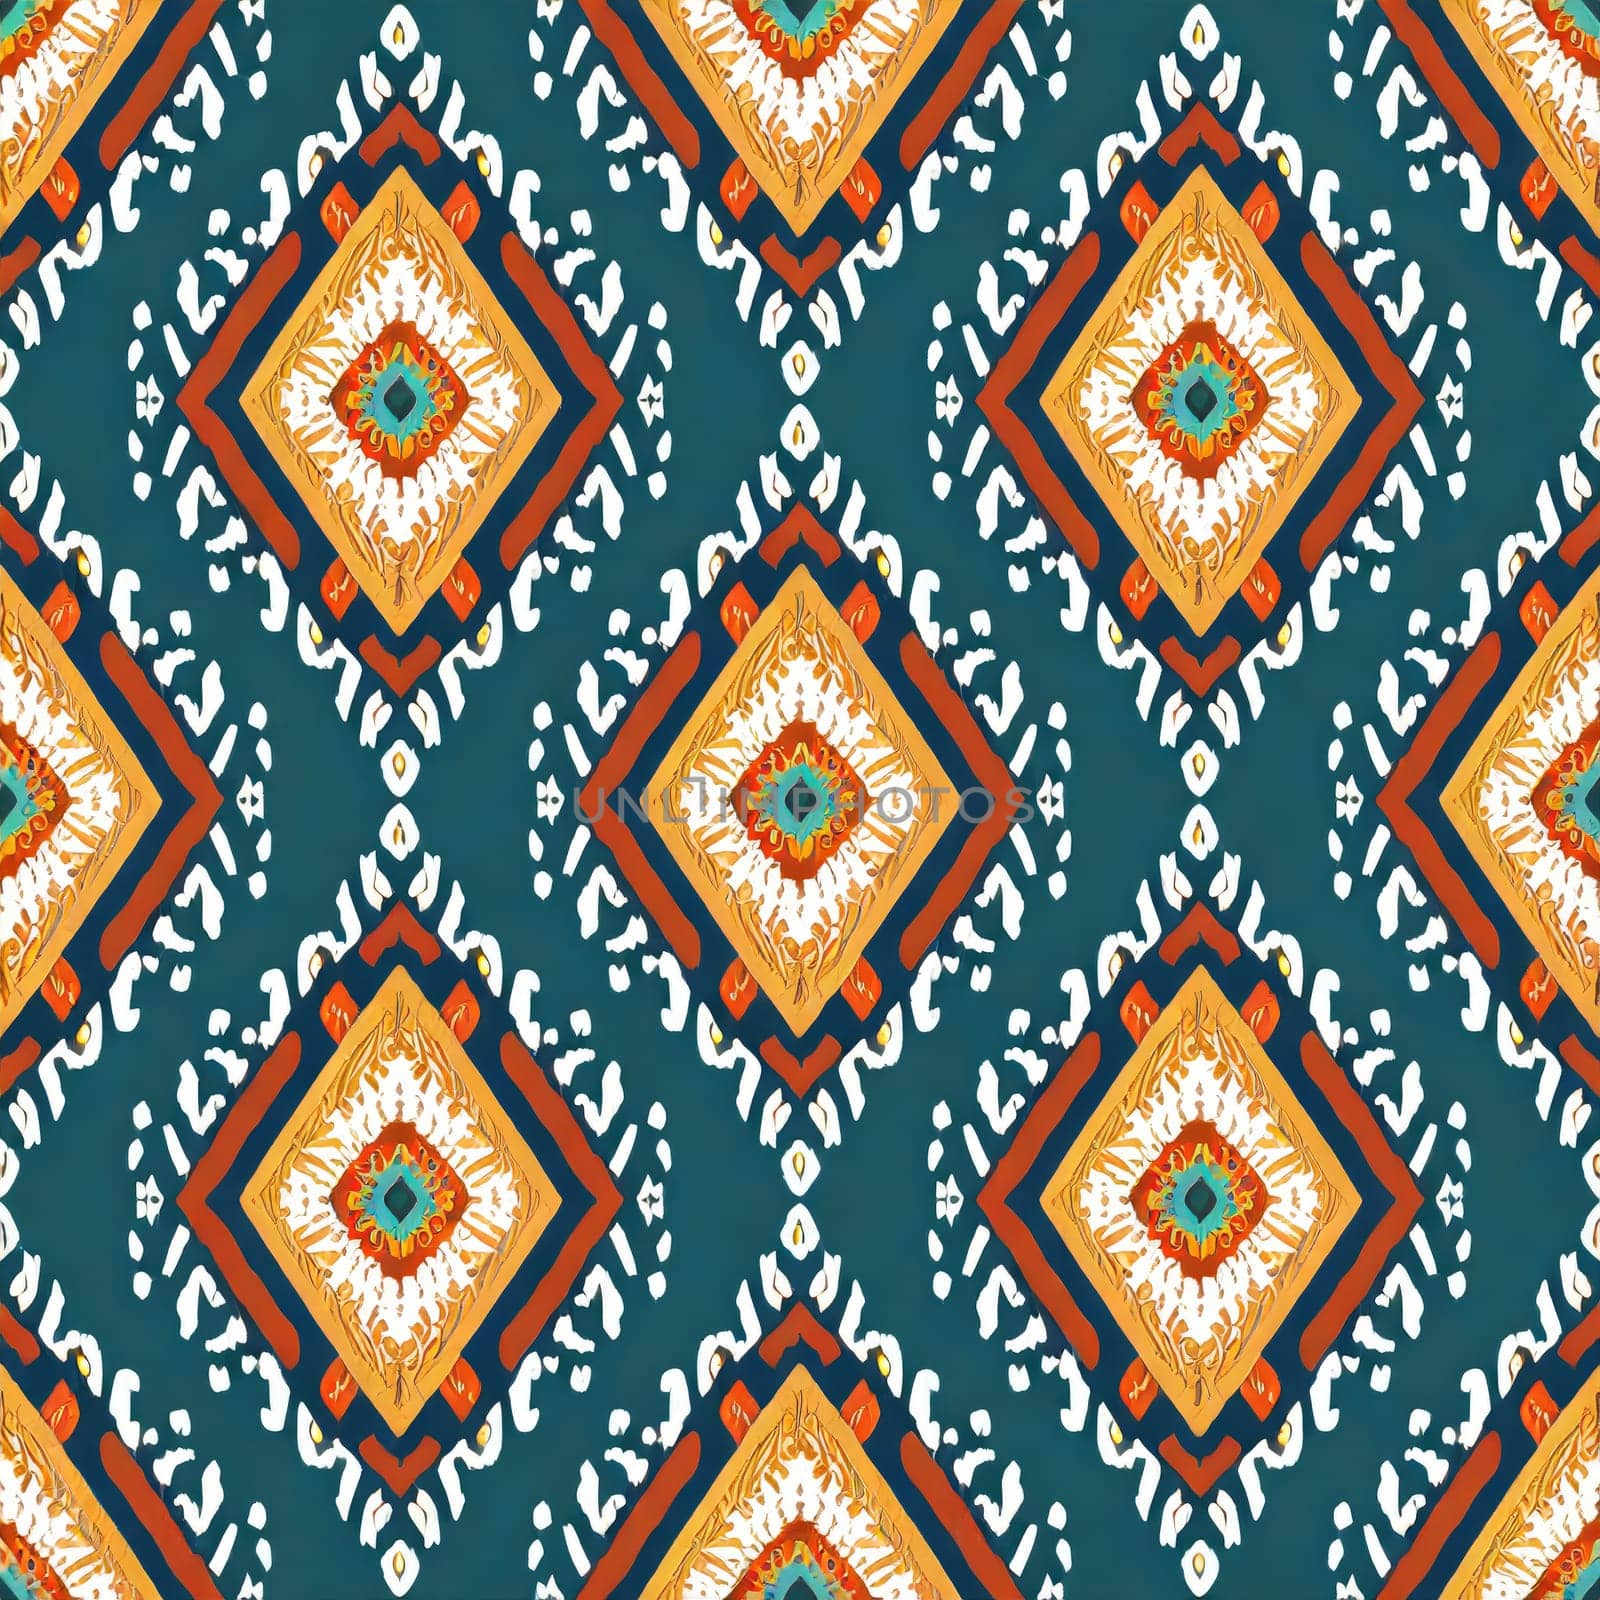 ikat geometric ethnic oriental seamless pattern. design ikat fabric for textile ethnic, native pattern motif, embroidery ikat style by PeaceYAY